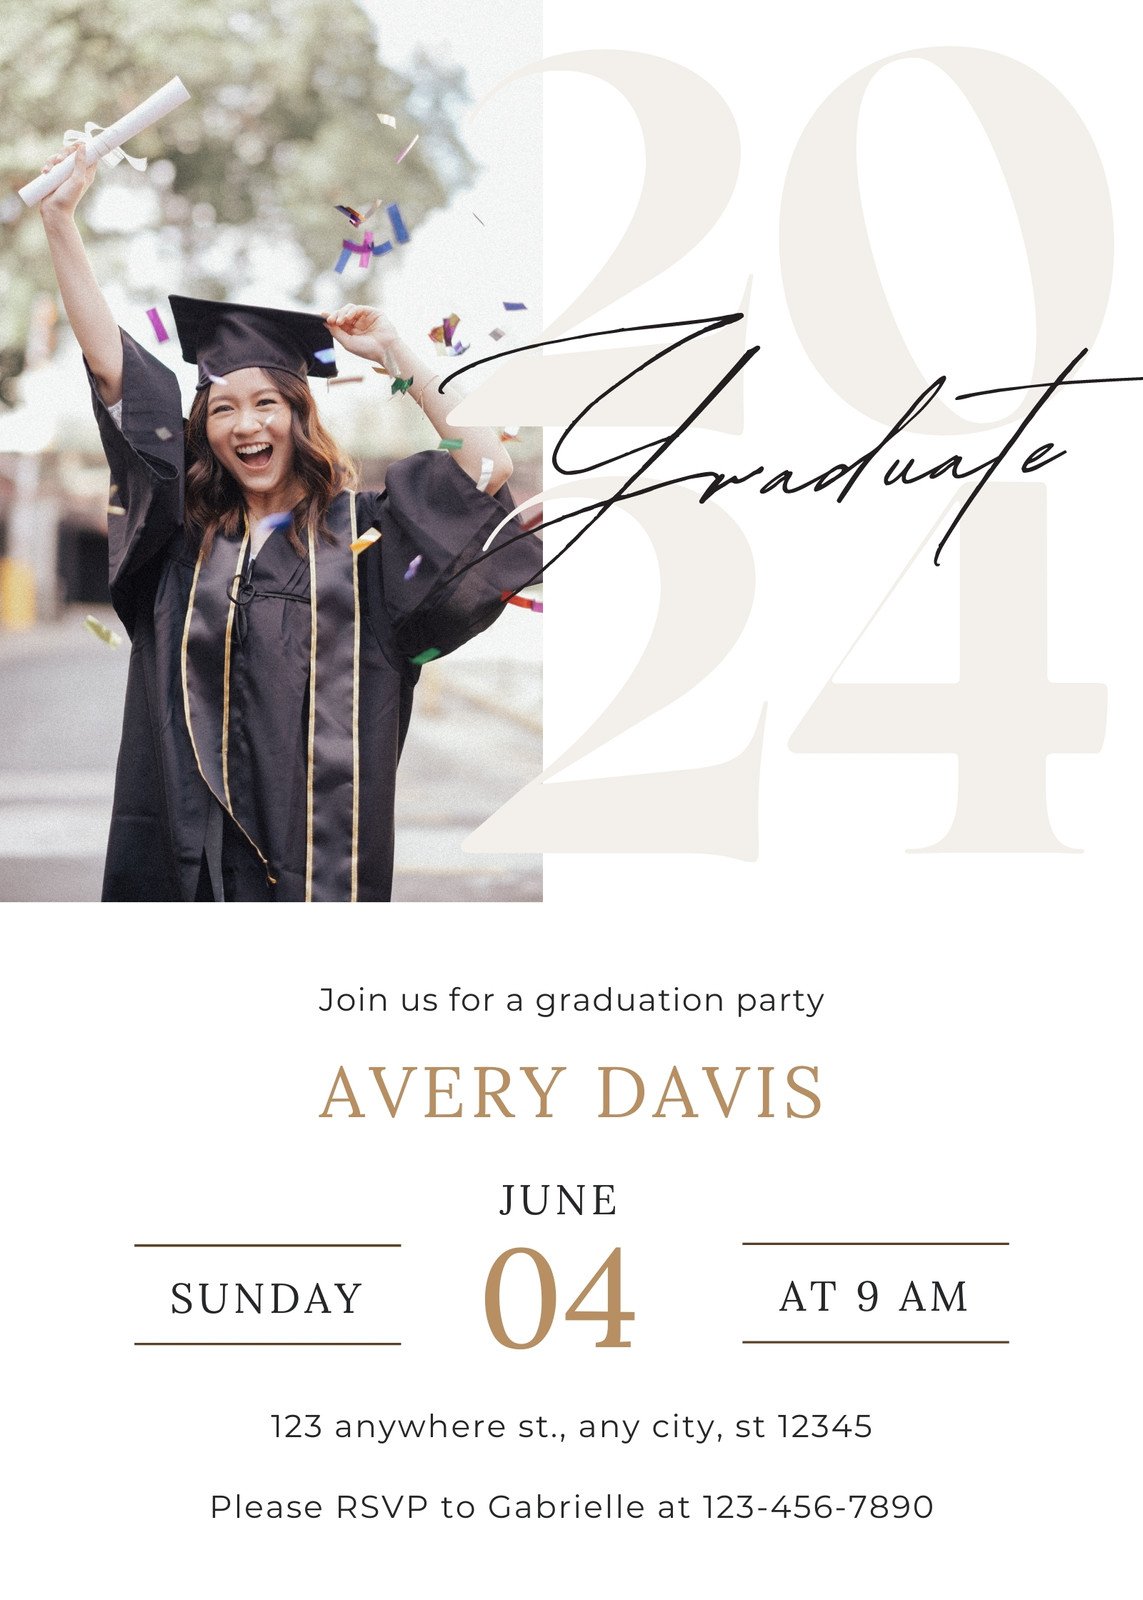 Hollywood Theme party Invitation and Decorations for Graduation